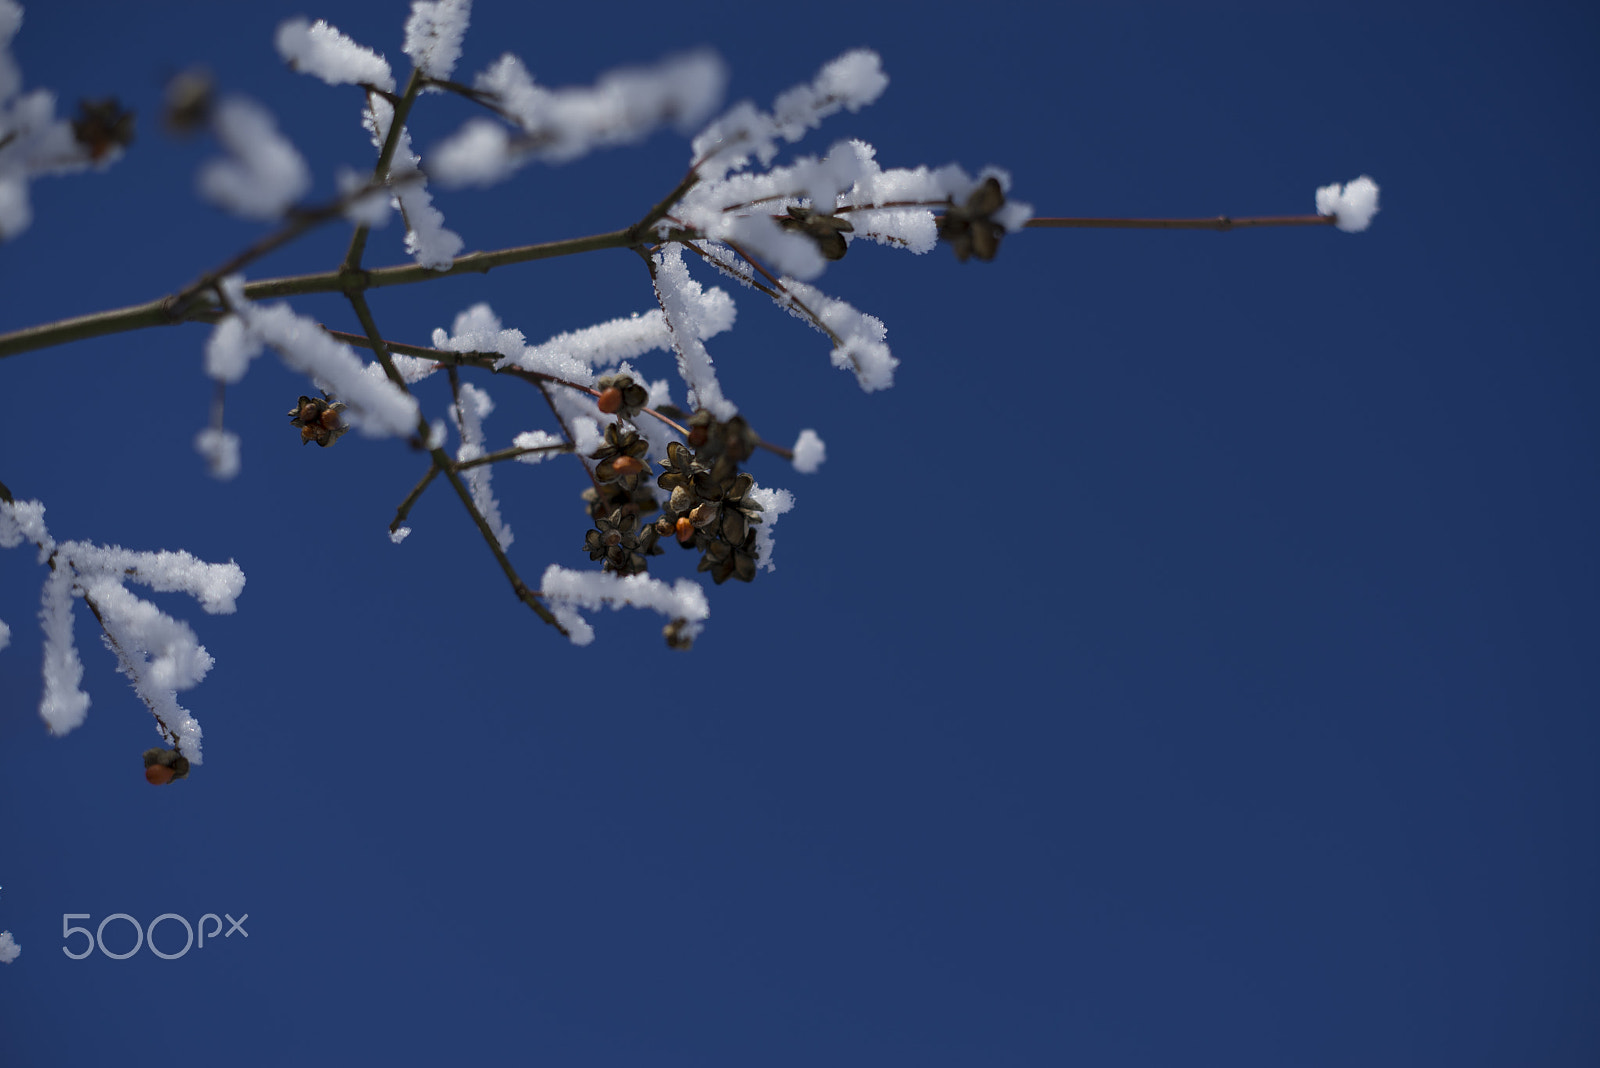 E 50mm F0 sample photo. A crystalline twigs photography